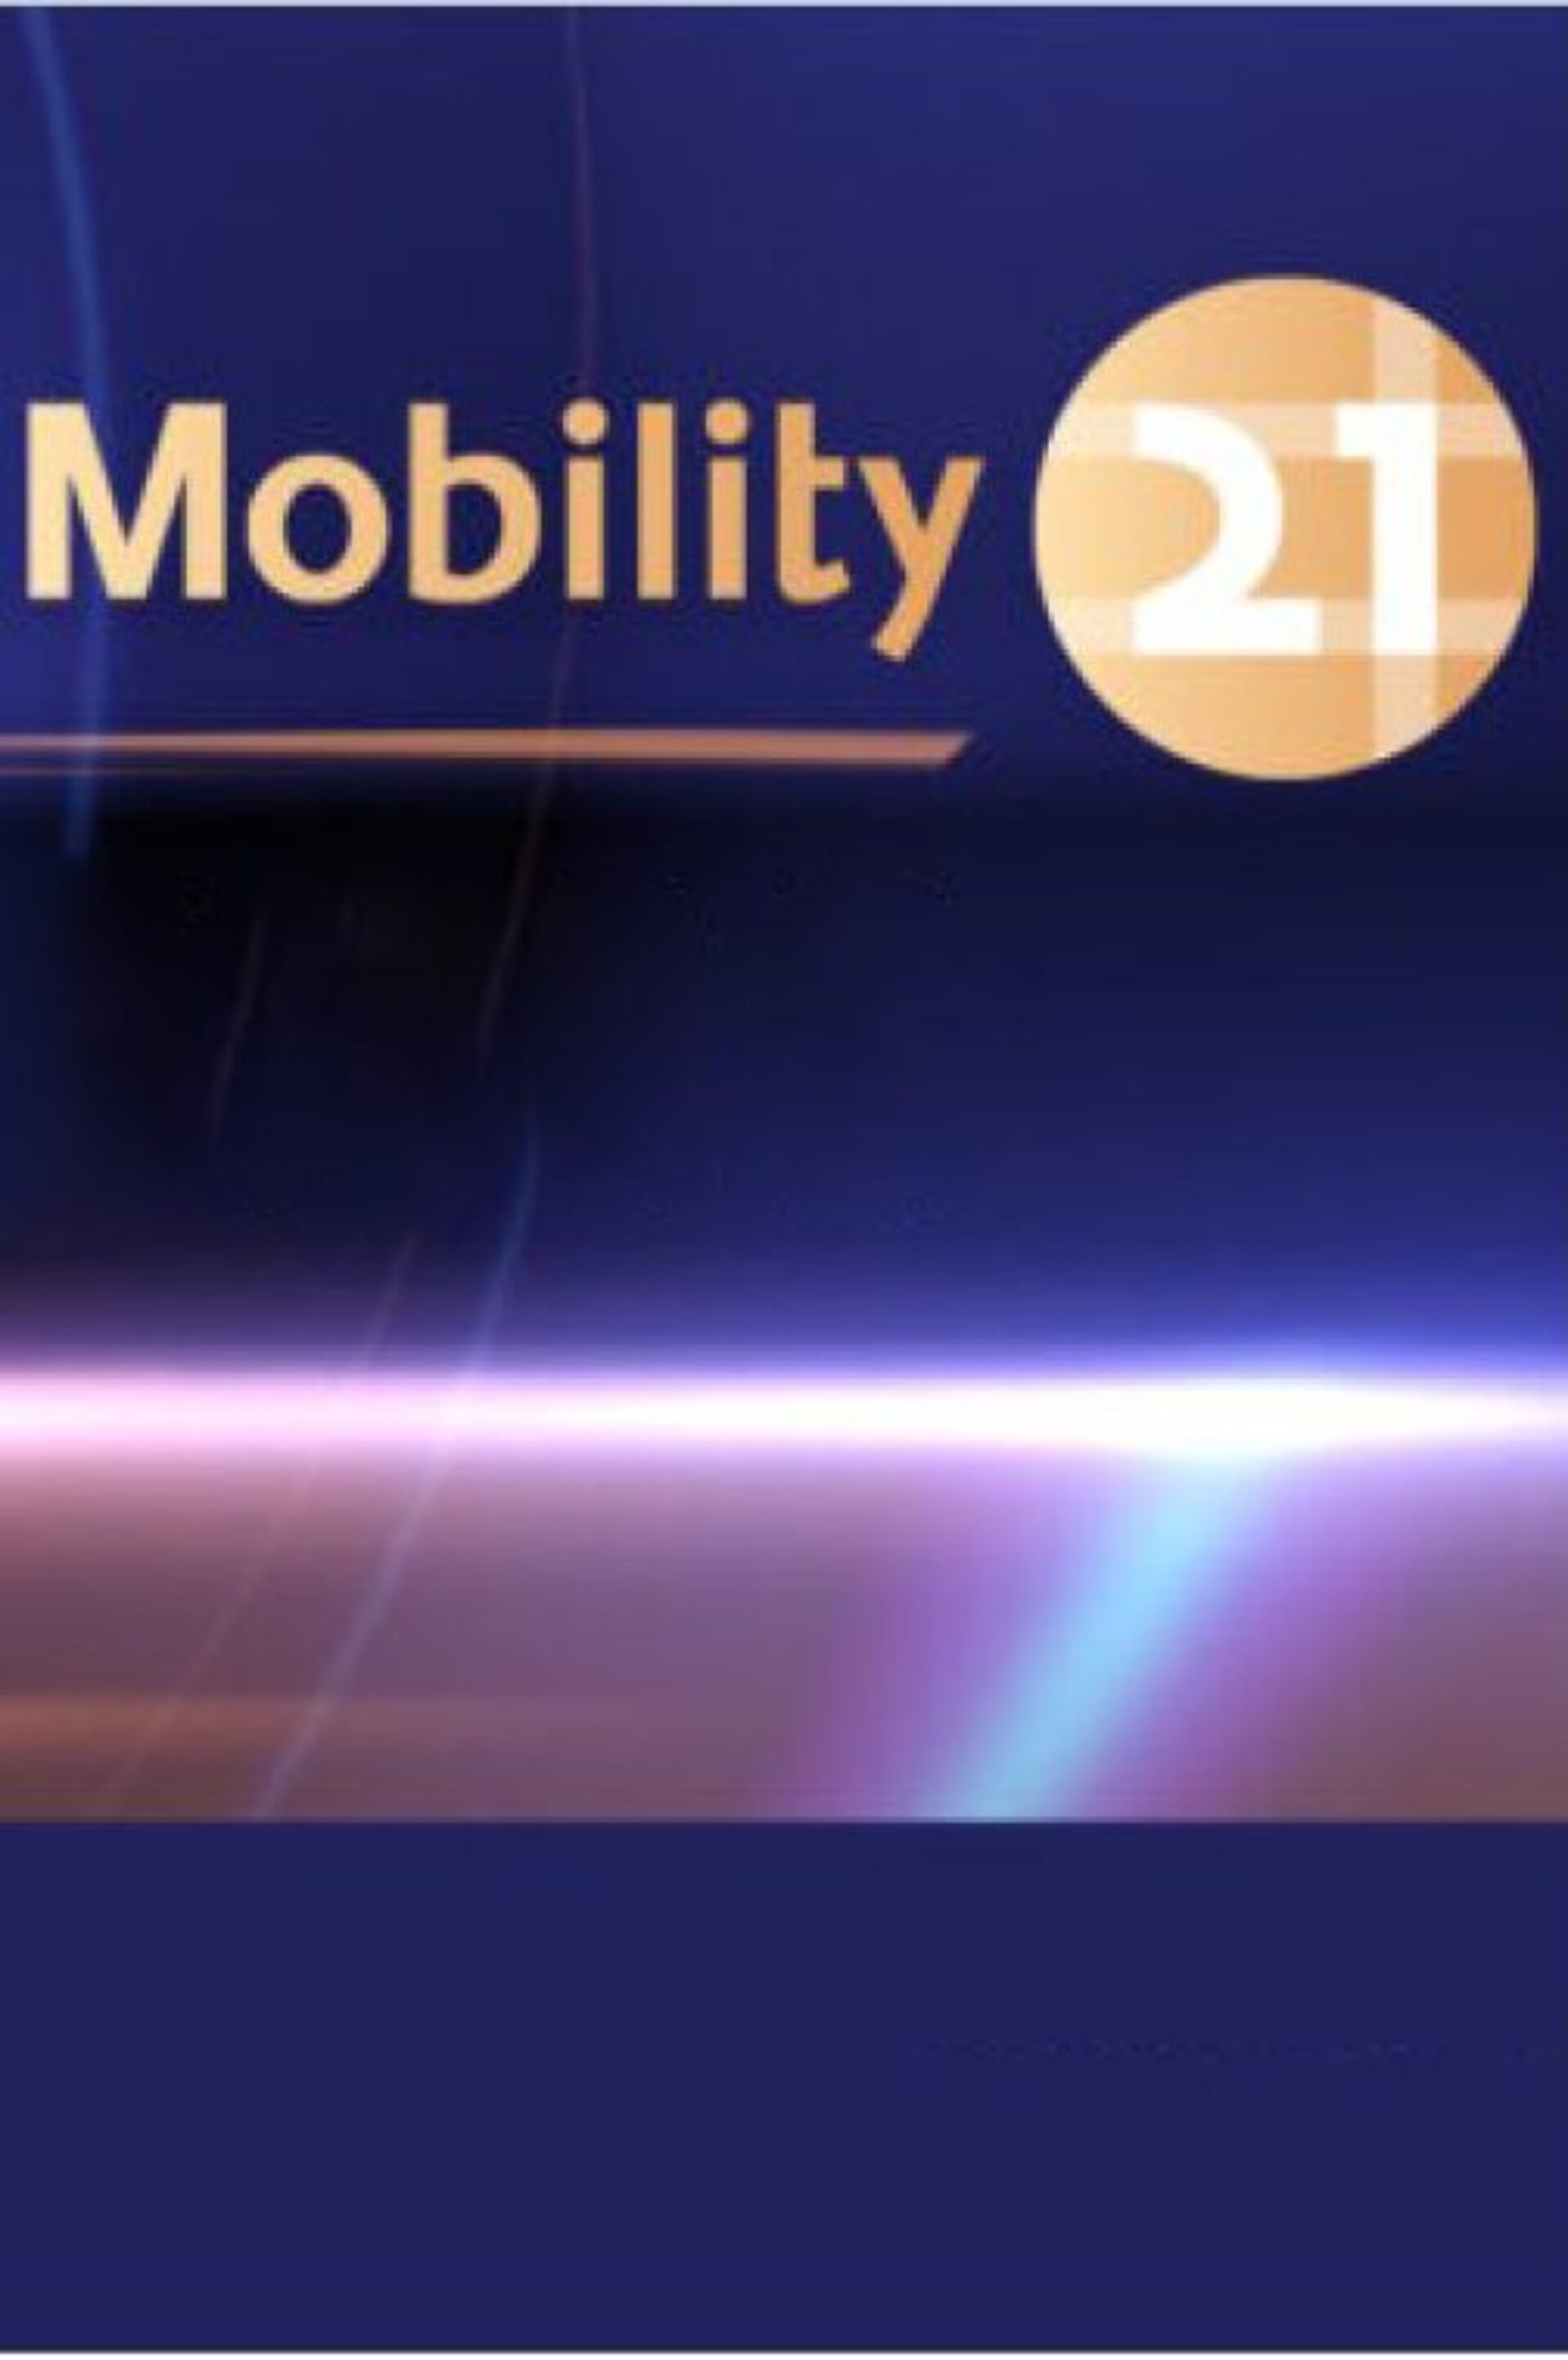 mobility 21 image